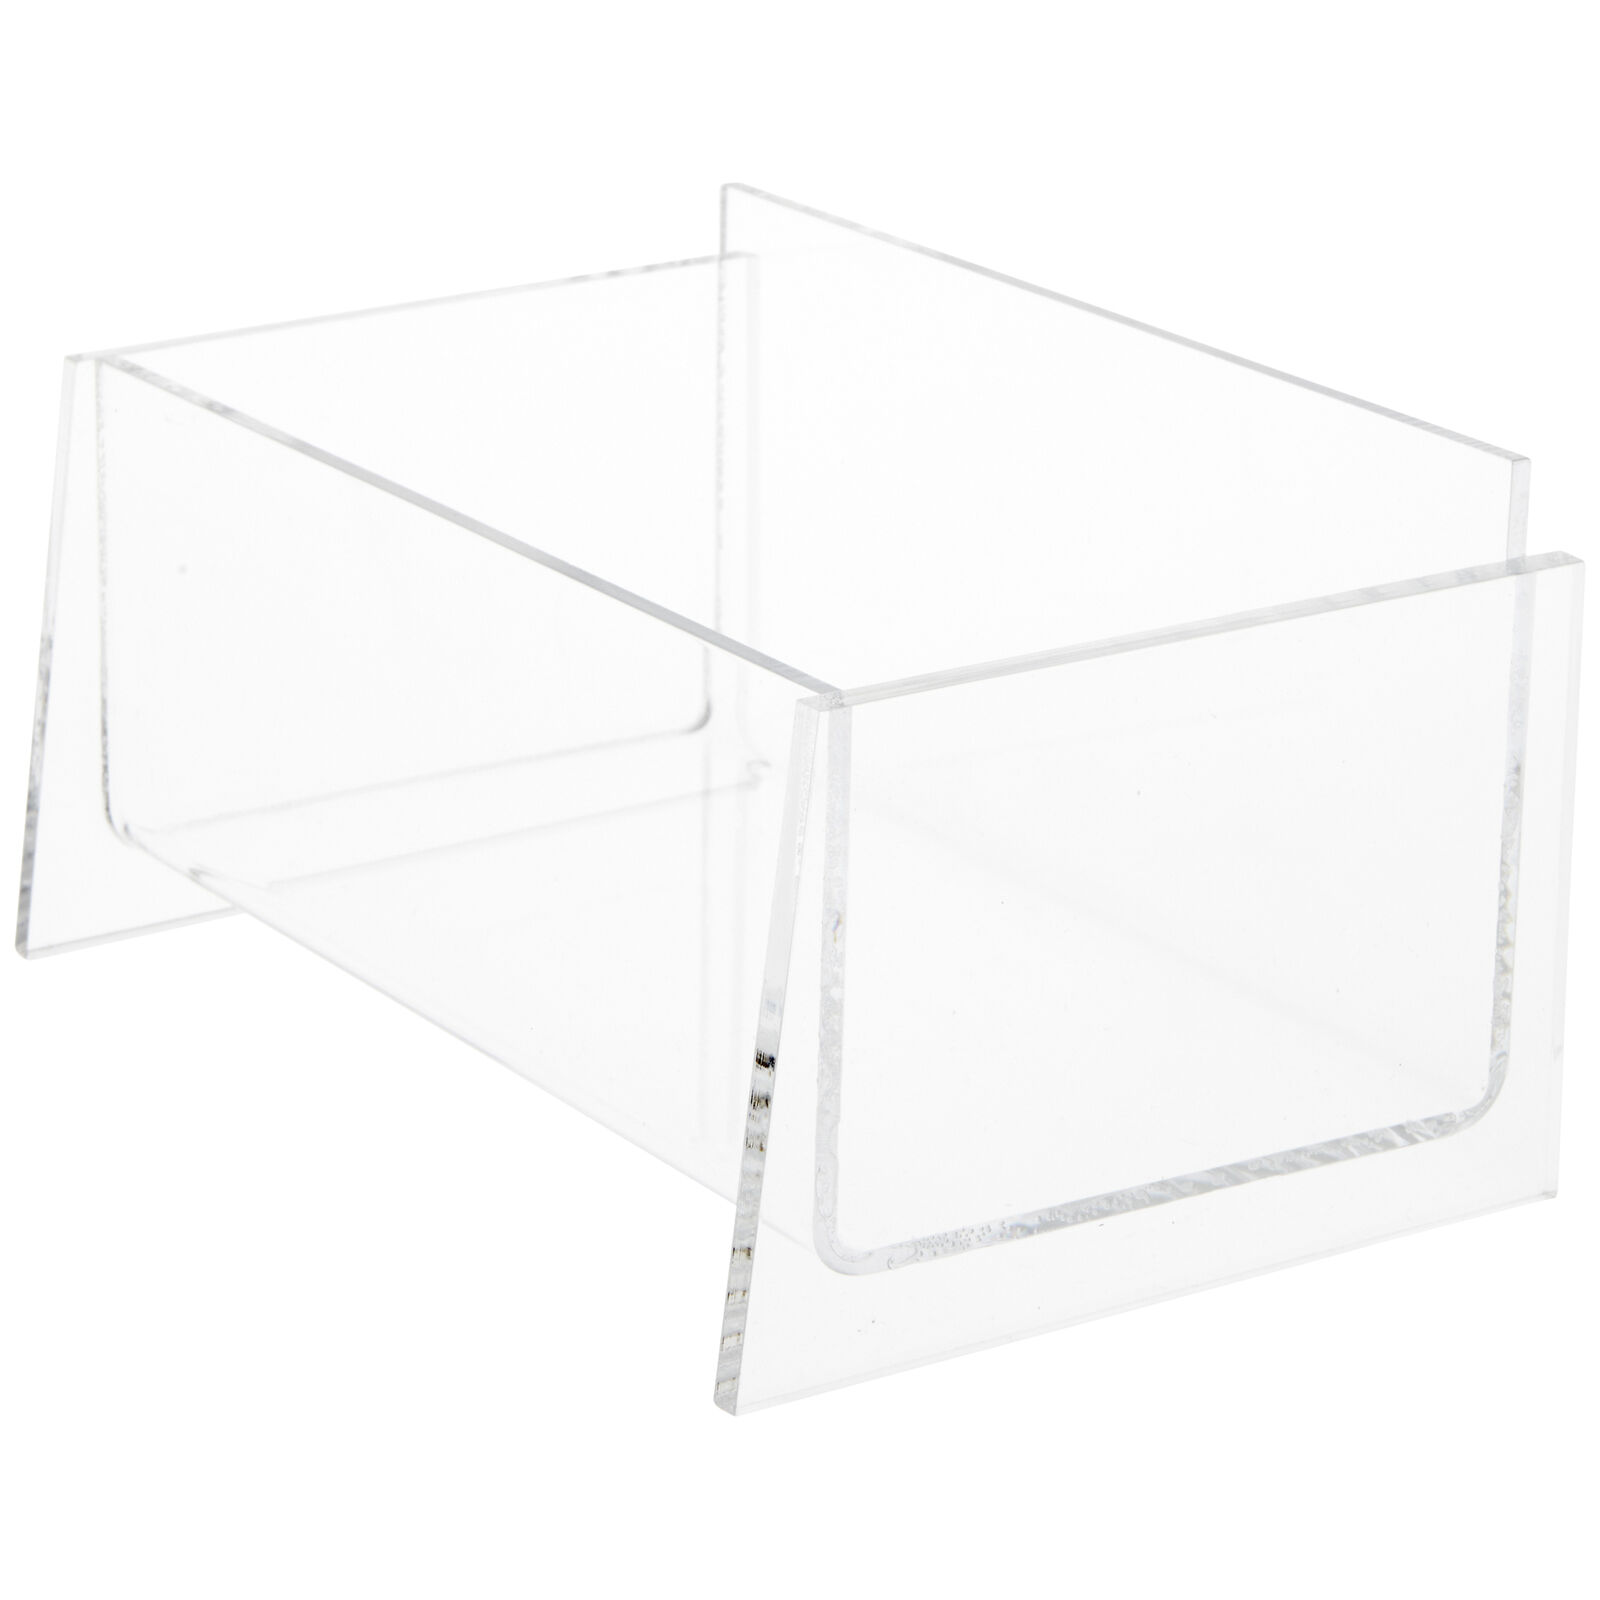 Plymor Acrylic  Postcard Holder (for Countertop), For 5.8" X 4.1" Items (3 Pack)